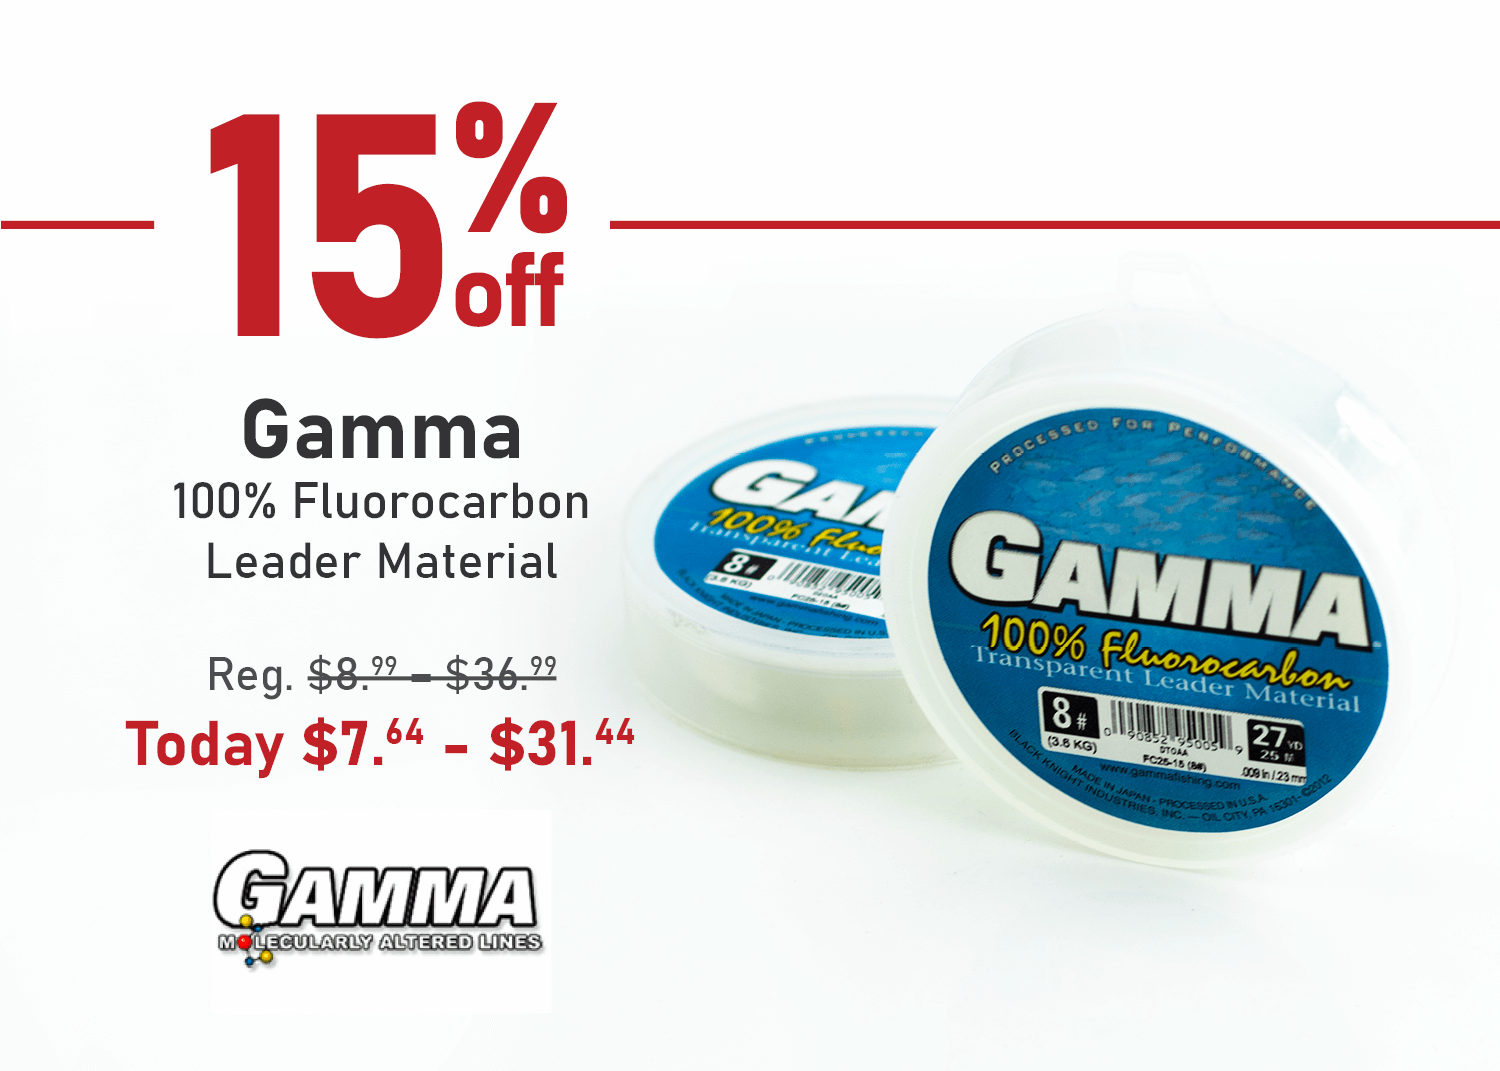 Save 15% on Gamma 100% Fluorocarbon Leader Material